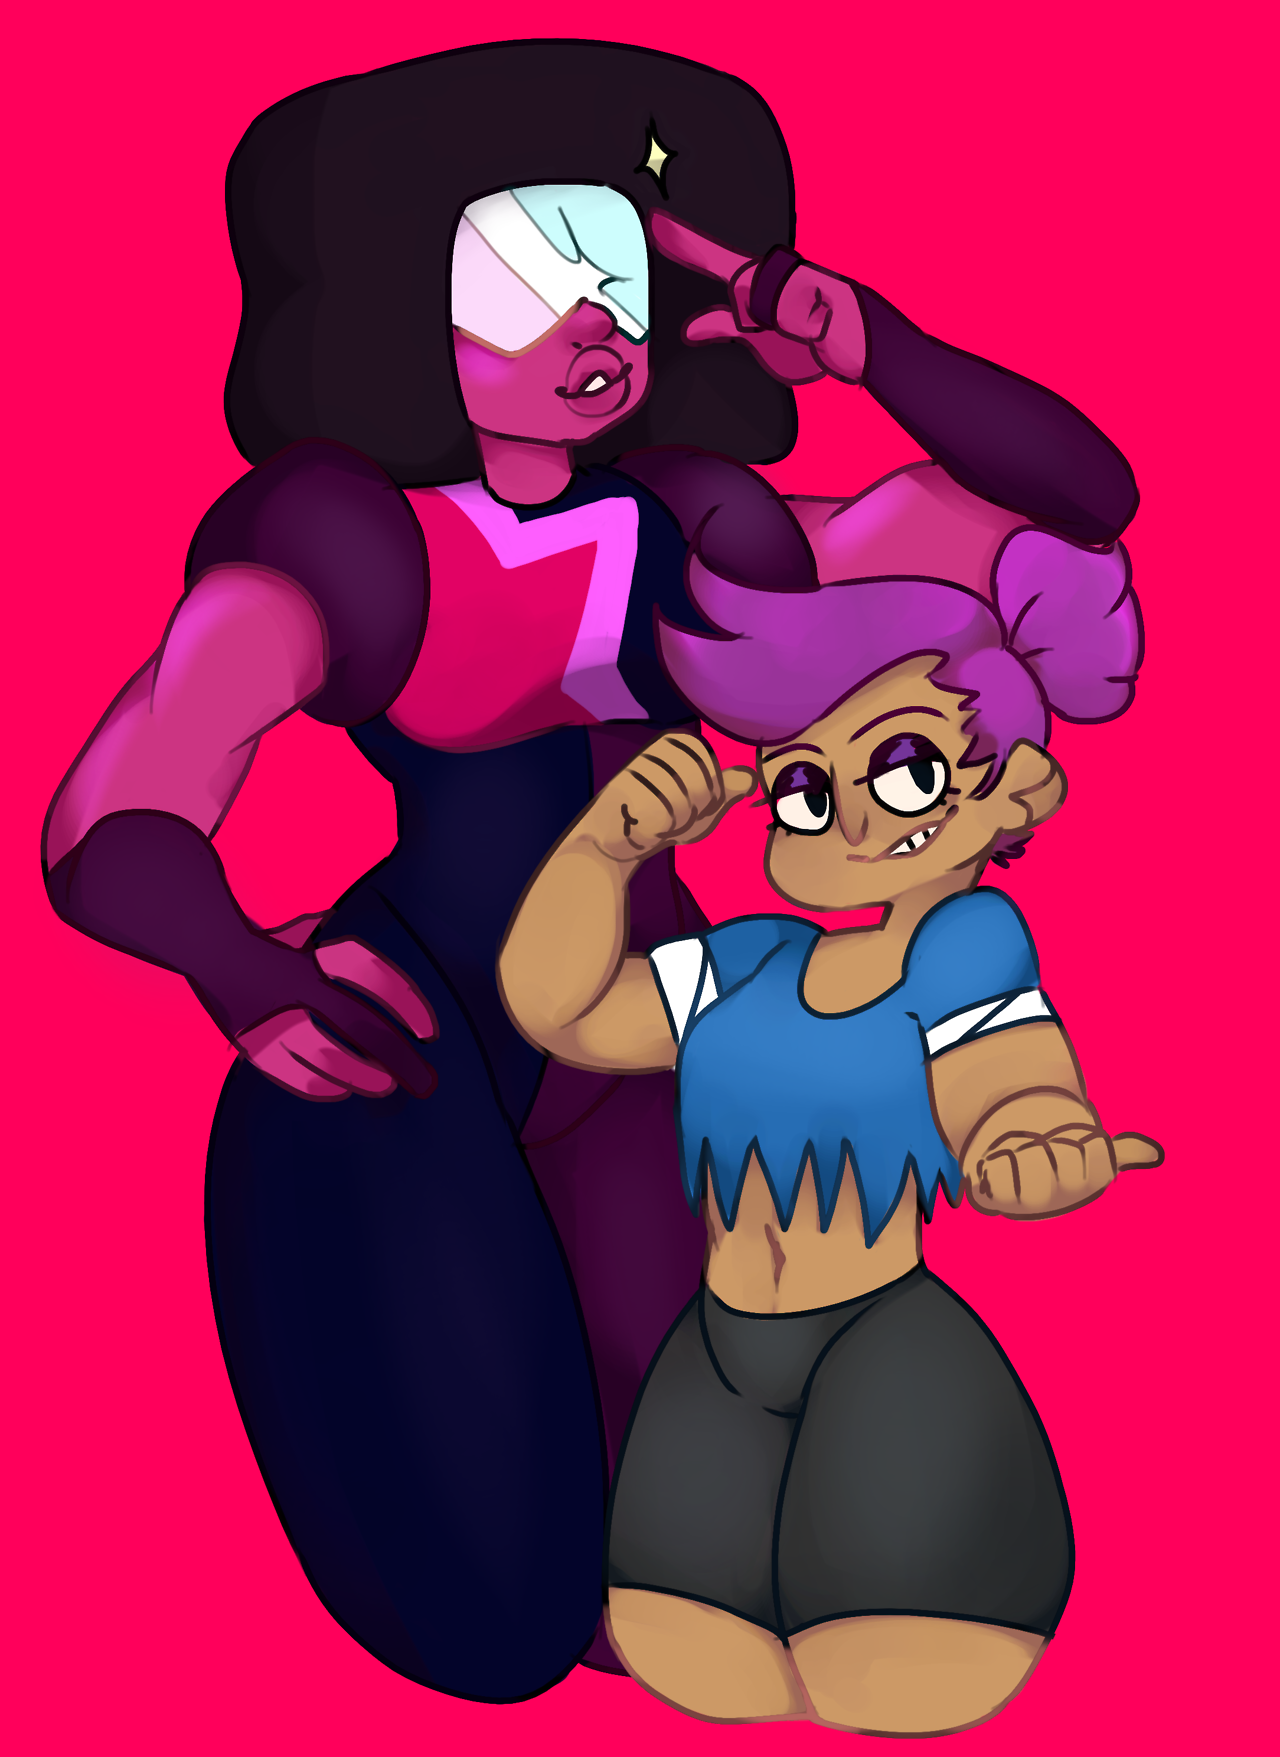 Who’s thiccer: Garnet or Enid 🤔 Answer: it doesn’t matter because theyre both buff beautiful babes who’re hella gay